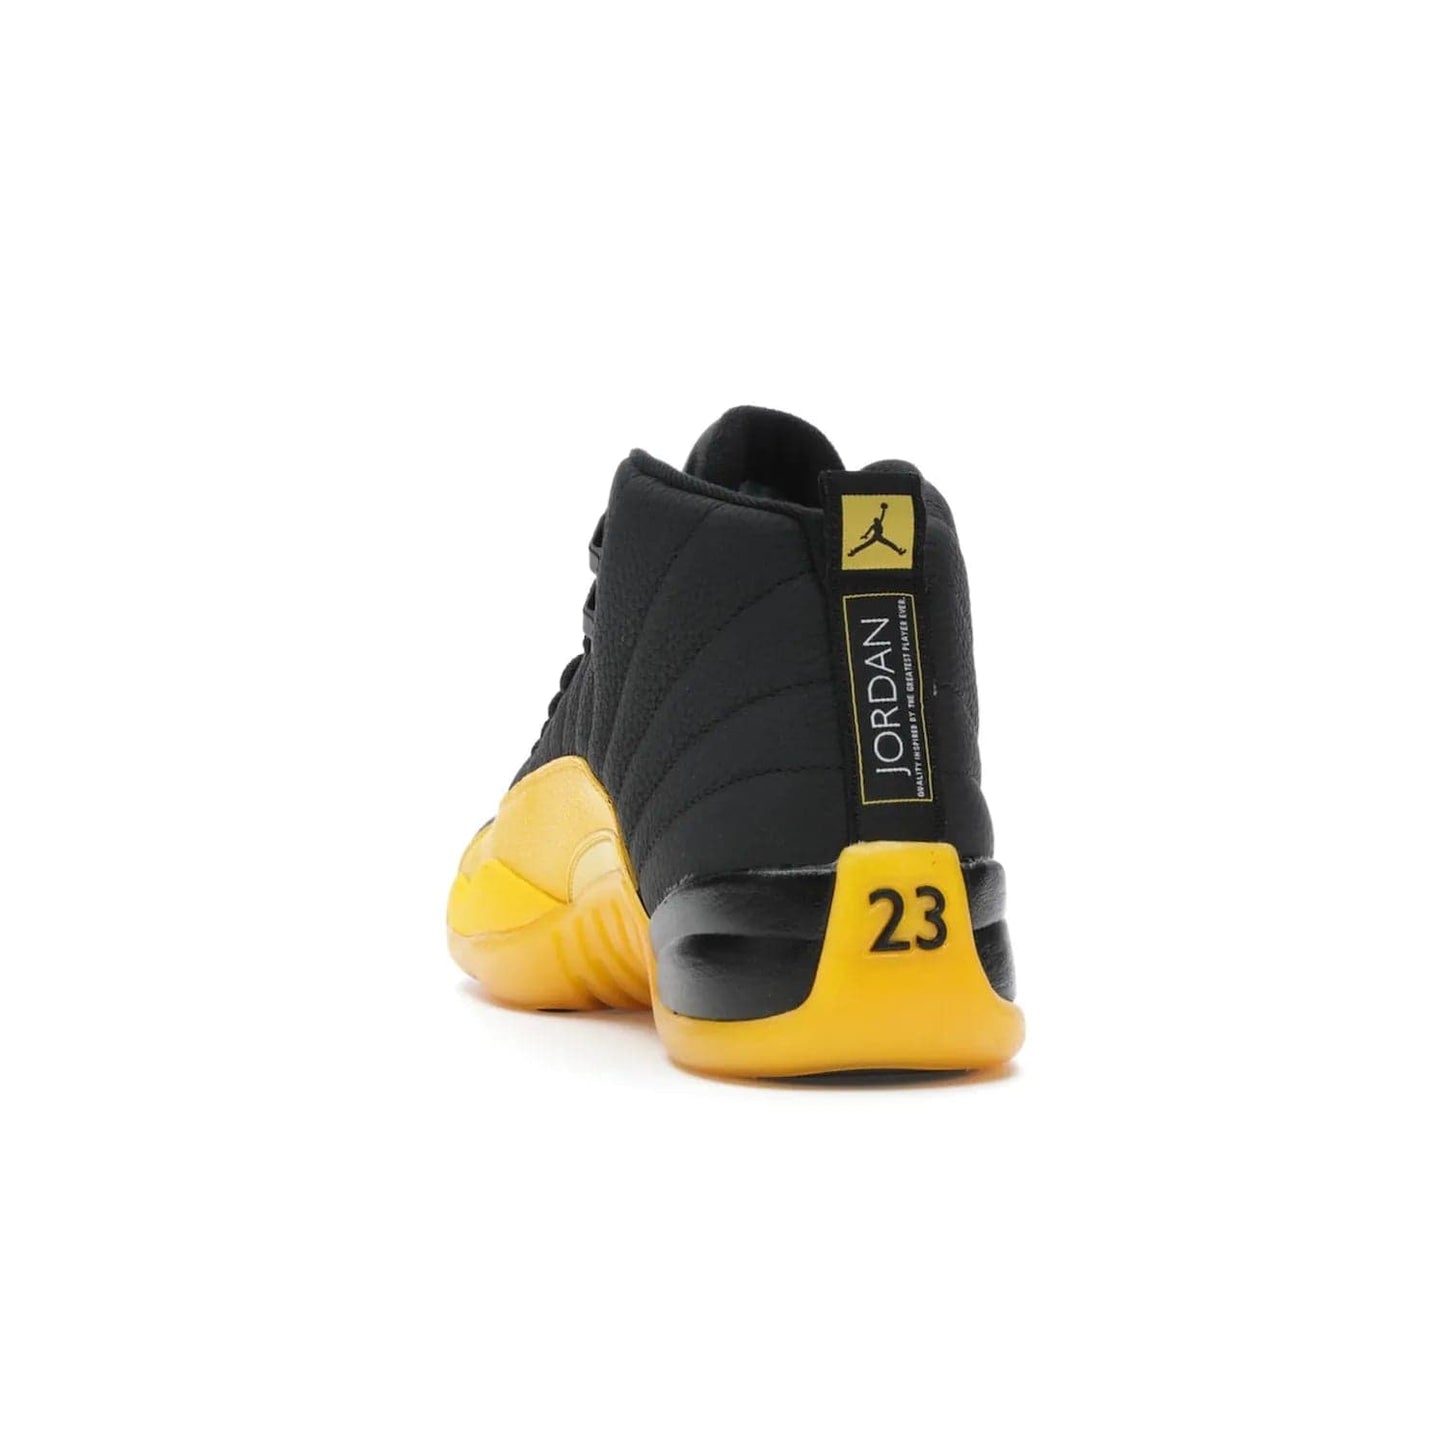 Jordan 12 Retro Black University Gold - Image 26 - Only at www.BallersClubKickz.com - This Jordan 12 Retro features a black tumbled leather upper and University Gold accents for a modern twist. Boasting Jordan "Two Three" branding and a yellow sole, these shoes will elevate your wardrobe. Fresh, sleek, and one of a kind - the Jordan 12 University Gold is your summer sneaker.